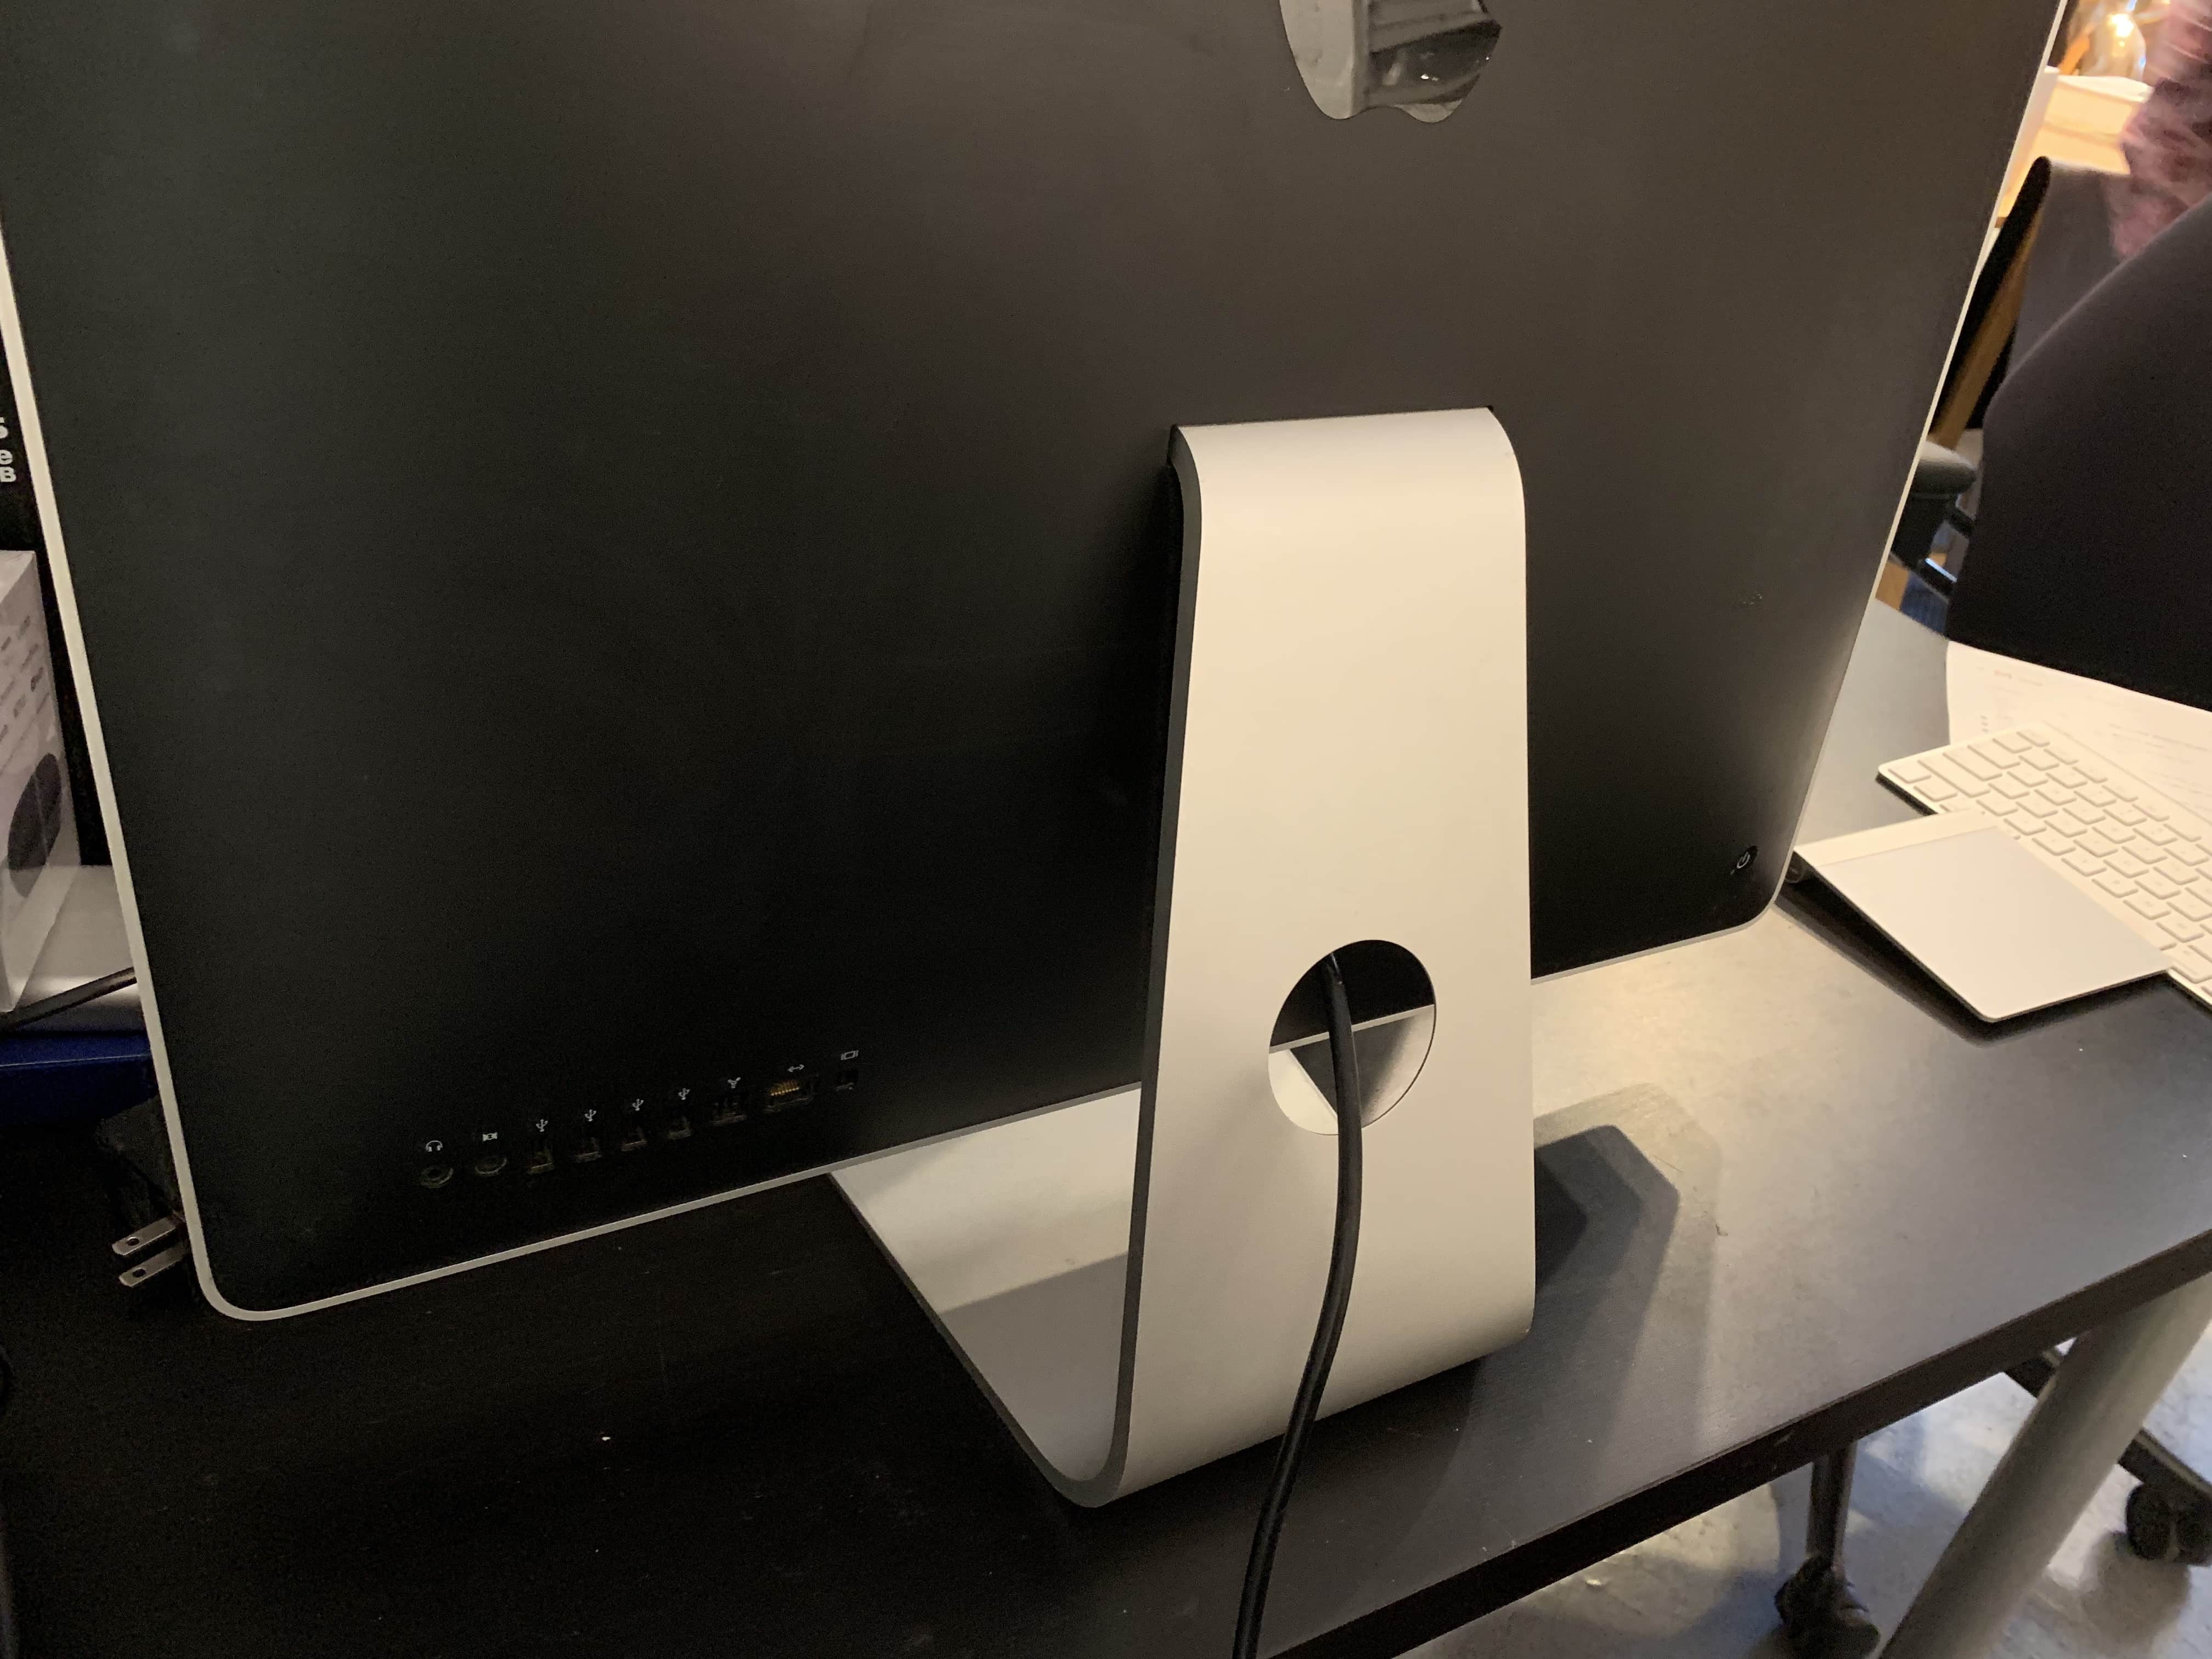 The back of an iMac, showing the cable hole in the stand